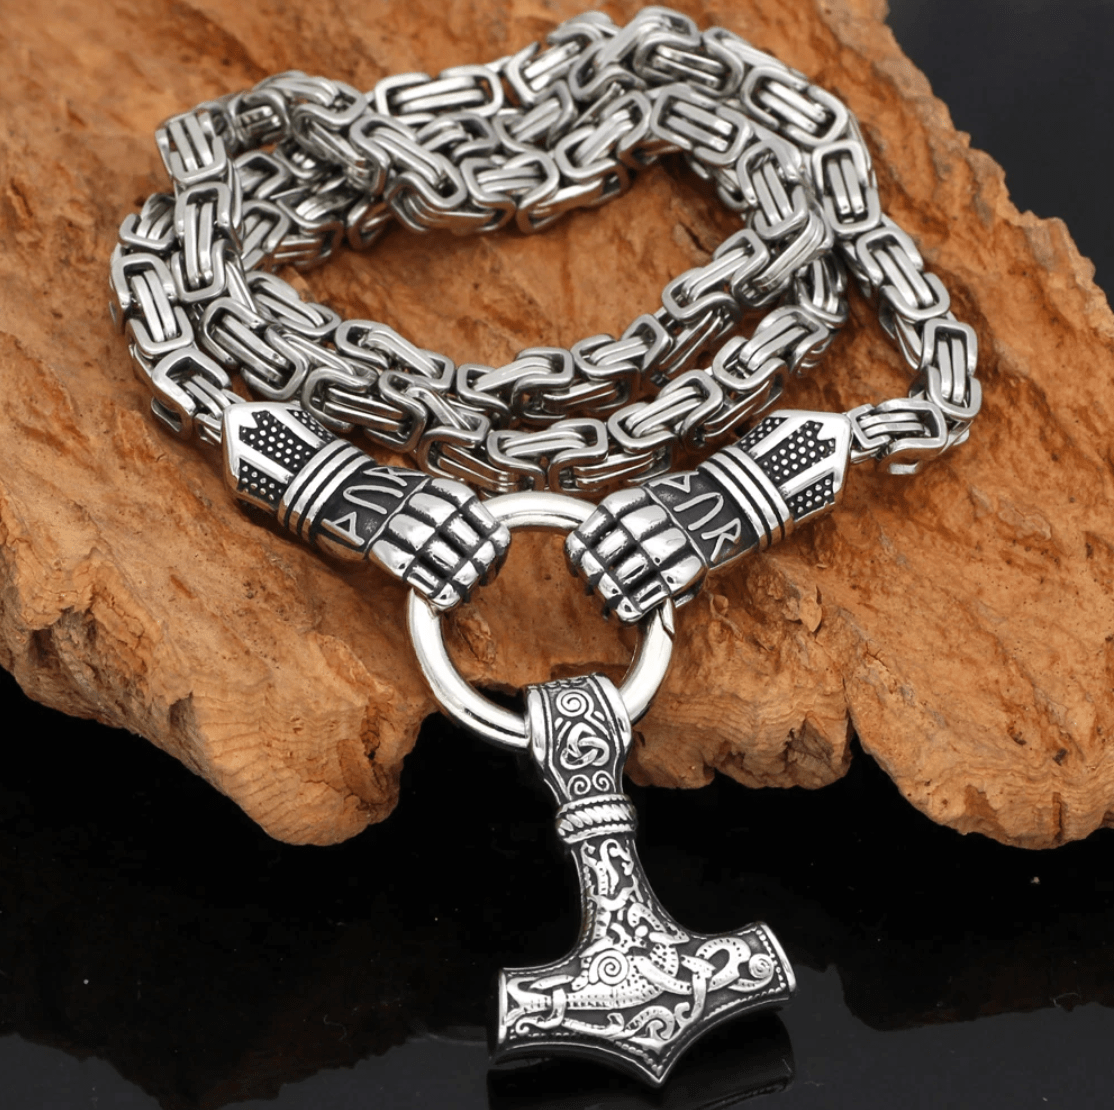 Pendant and Necklaces 50 cm Vikings Warrior Hand Mjolnir Stainless Steel Necklace Ancient Treasures Ancientreasures Viking Odin Thor Mjolnir Celtic Ancient Egypt Norse Norse Mythology